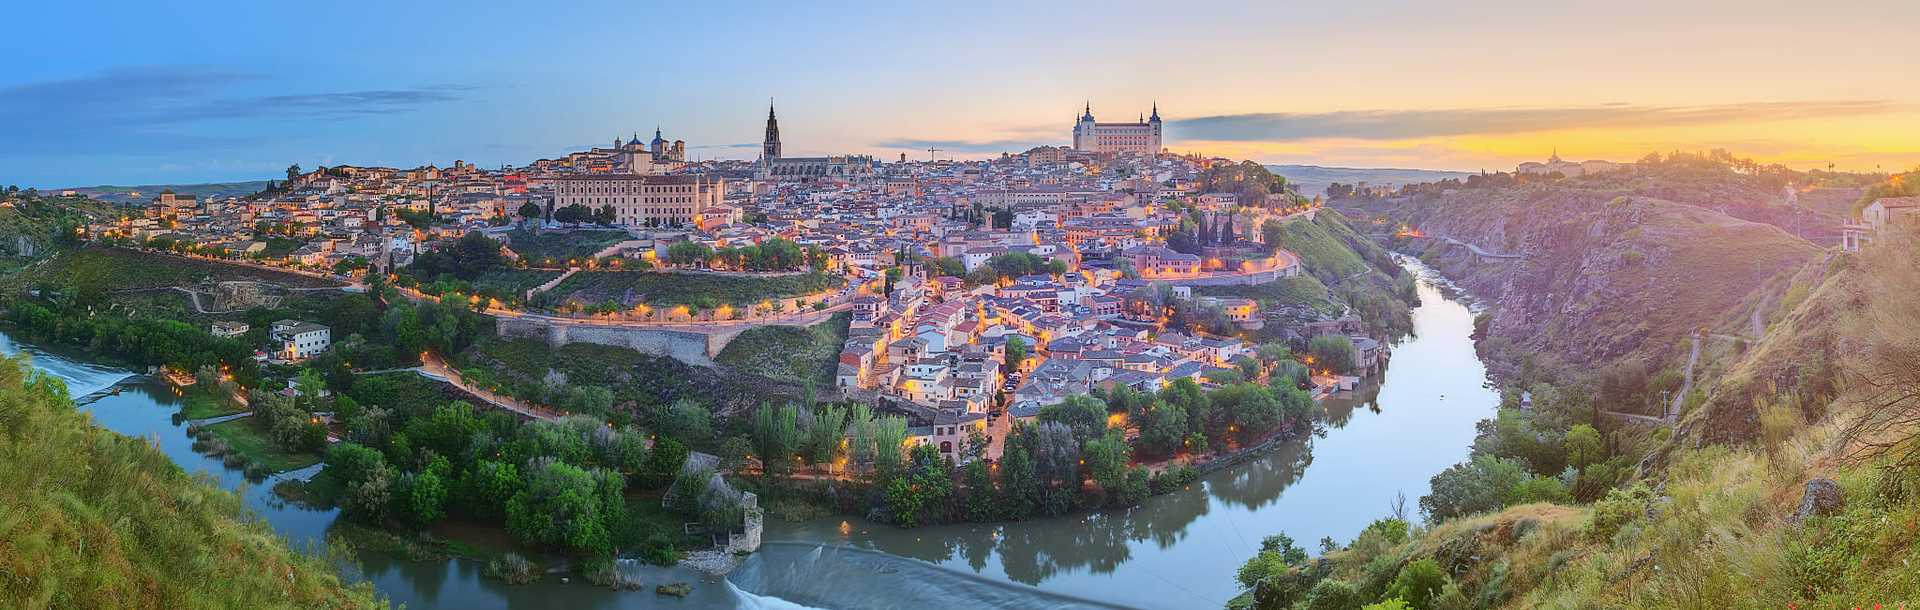 Panoramic view of ancient city and alcazar on a hill over the Tagus river, Castilla la Mancha, Toledo, Spain.